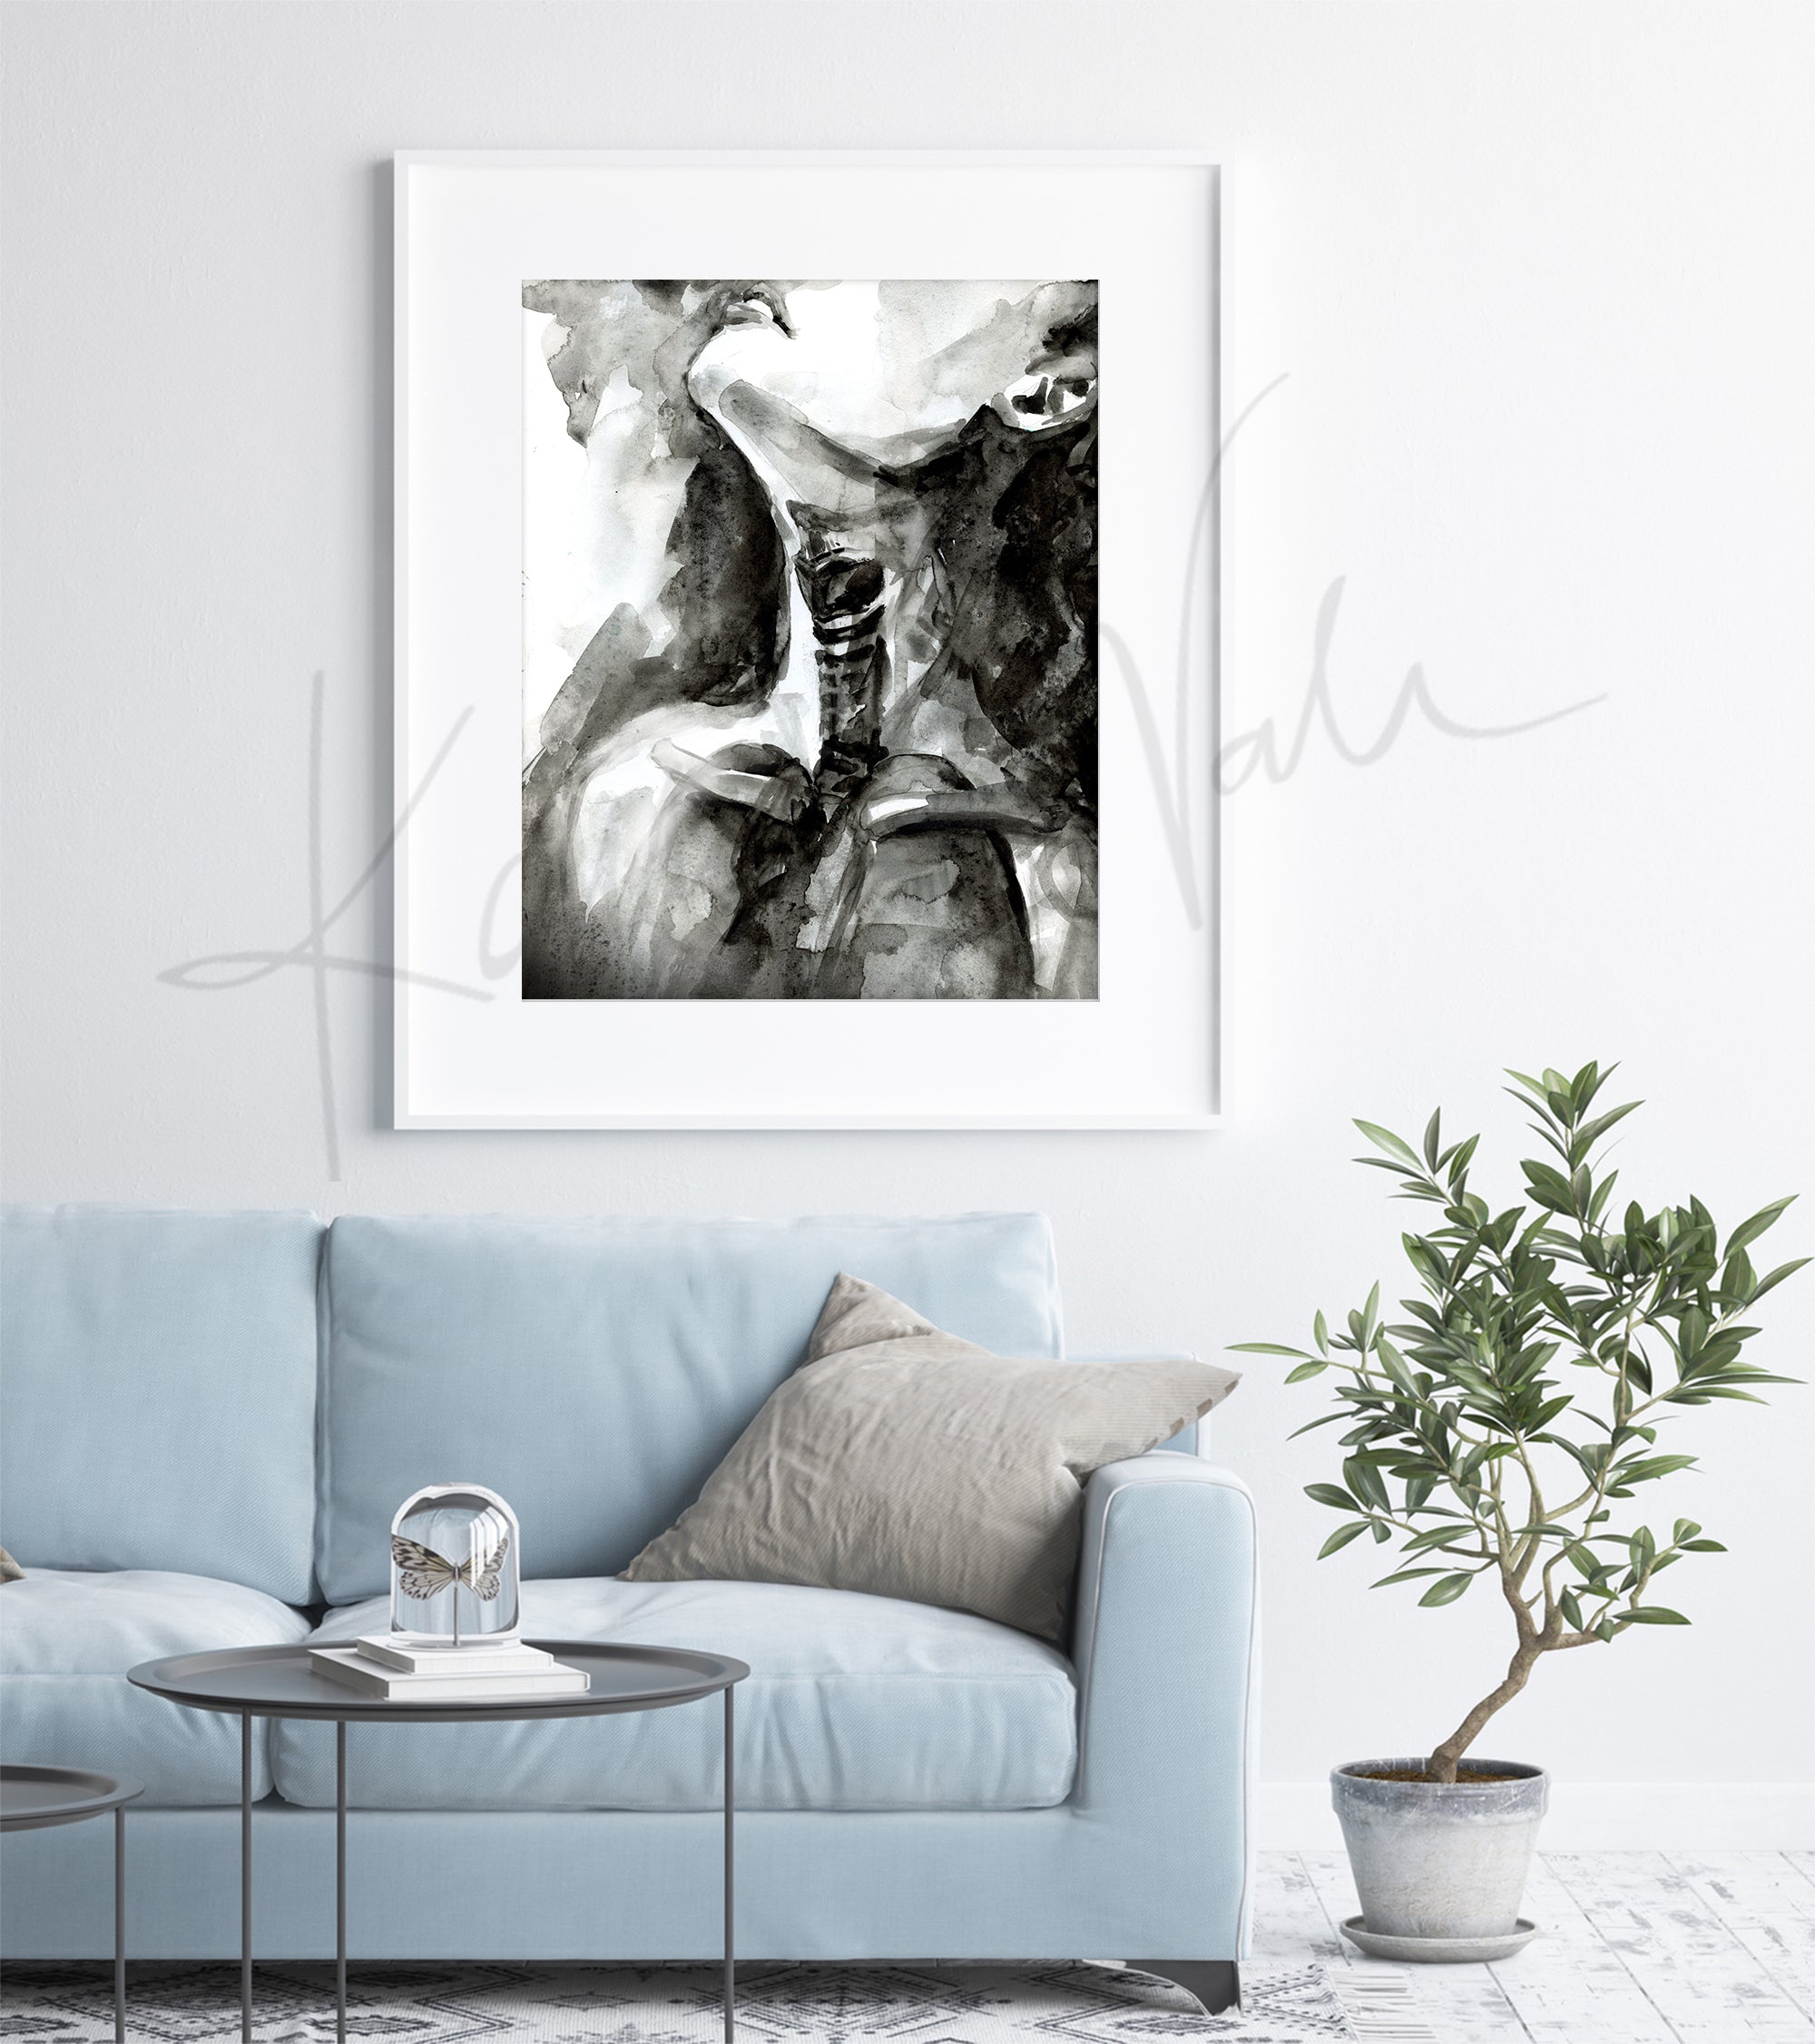 Framed watercolor painting of a woman with her face up taking a deep breath. Showing some of the throat and chest anatomy. The painting is hanging over a blue couch.